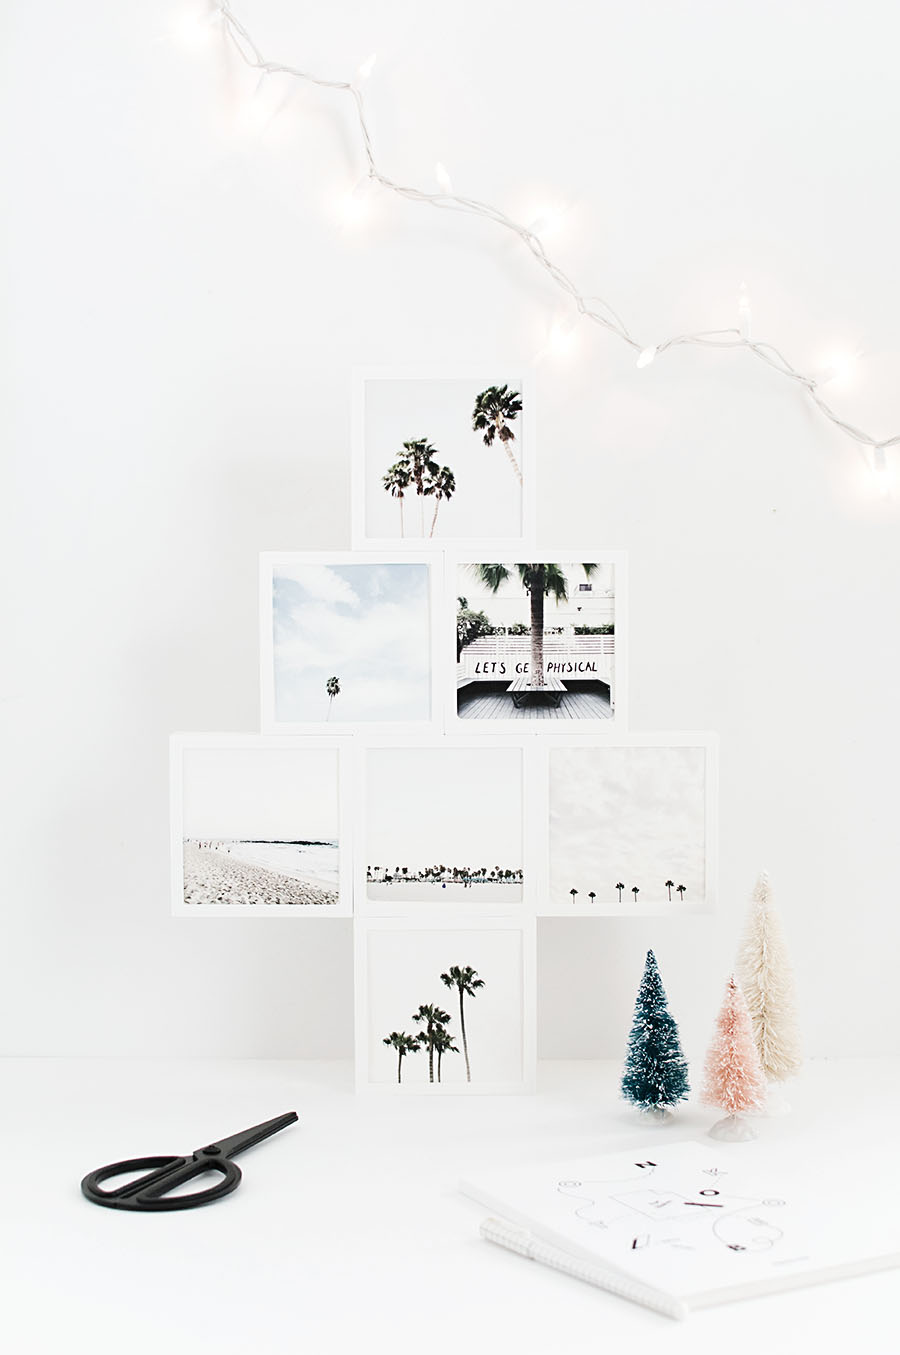 Make an elegant little photo Christmas tree using FotoBit frames and your favorite photos